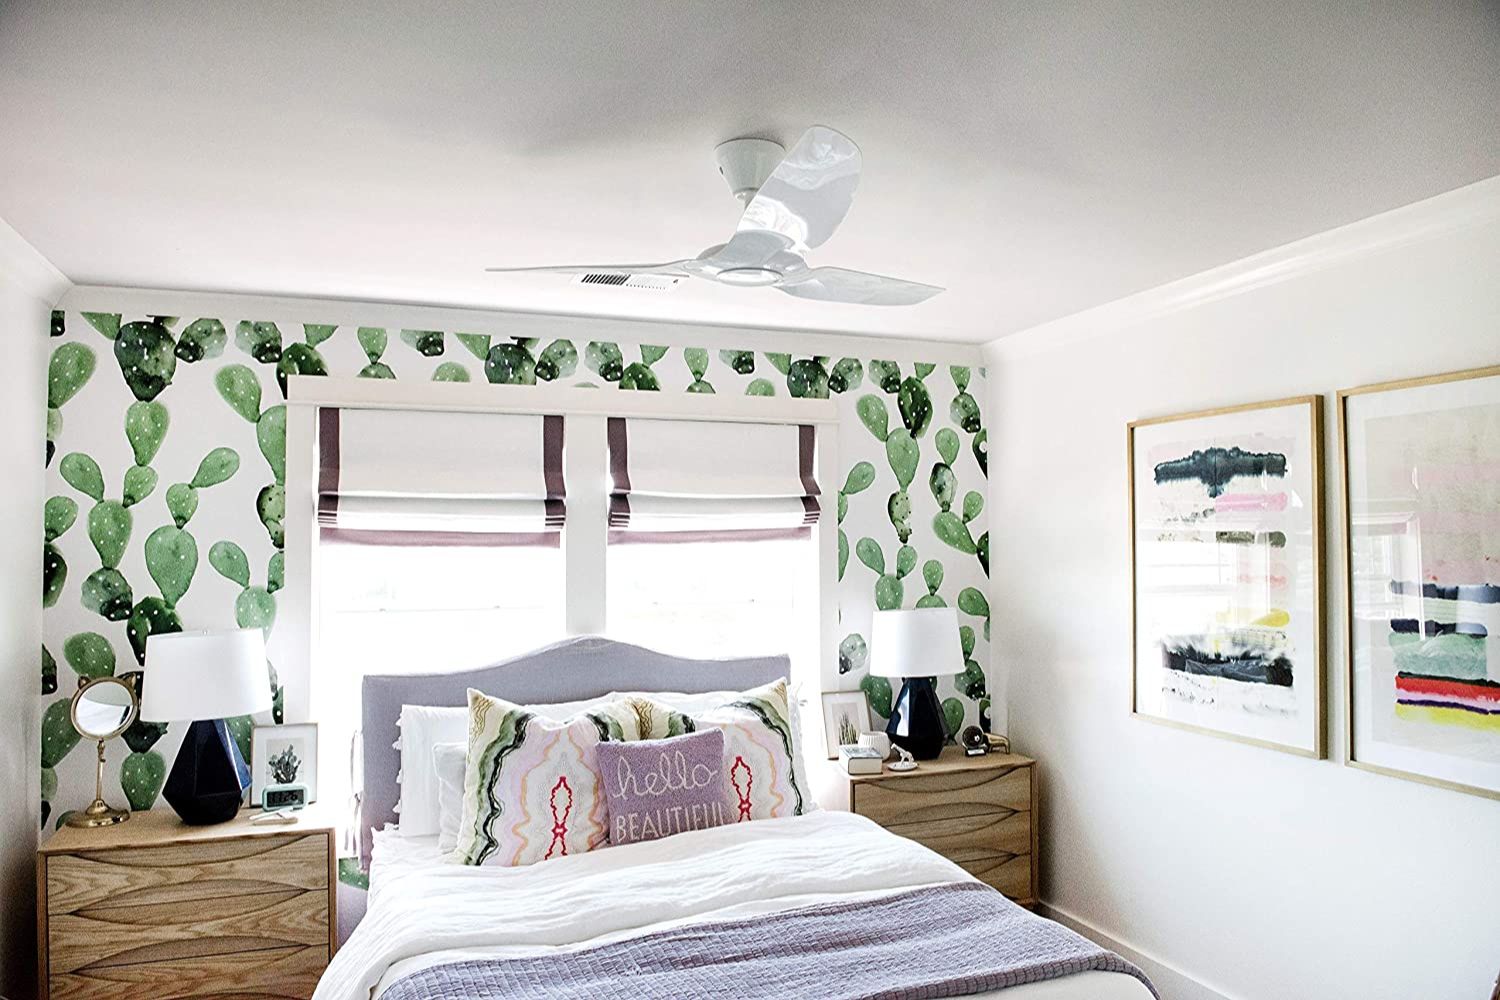 The Best Smart Ceiling Fans Option hanging in a bright and tidy bedroom